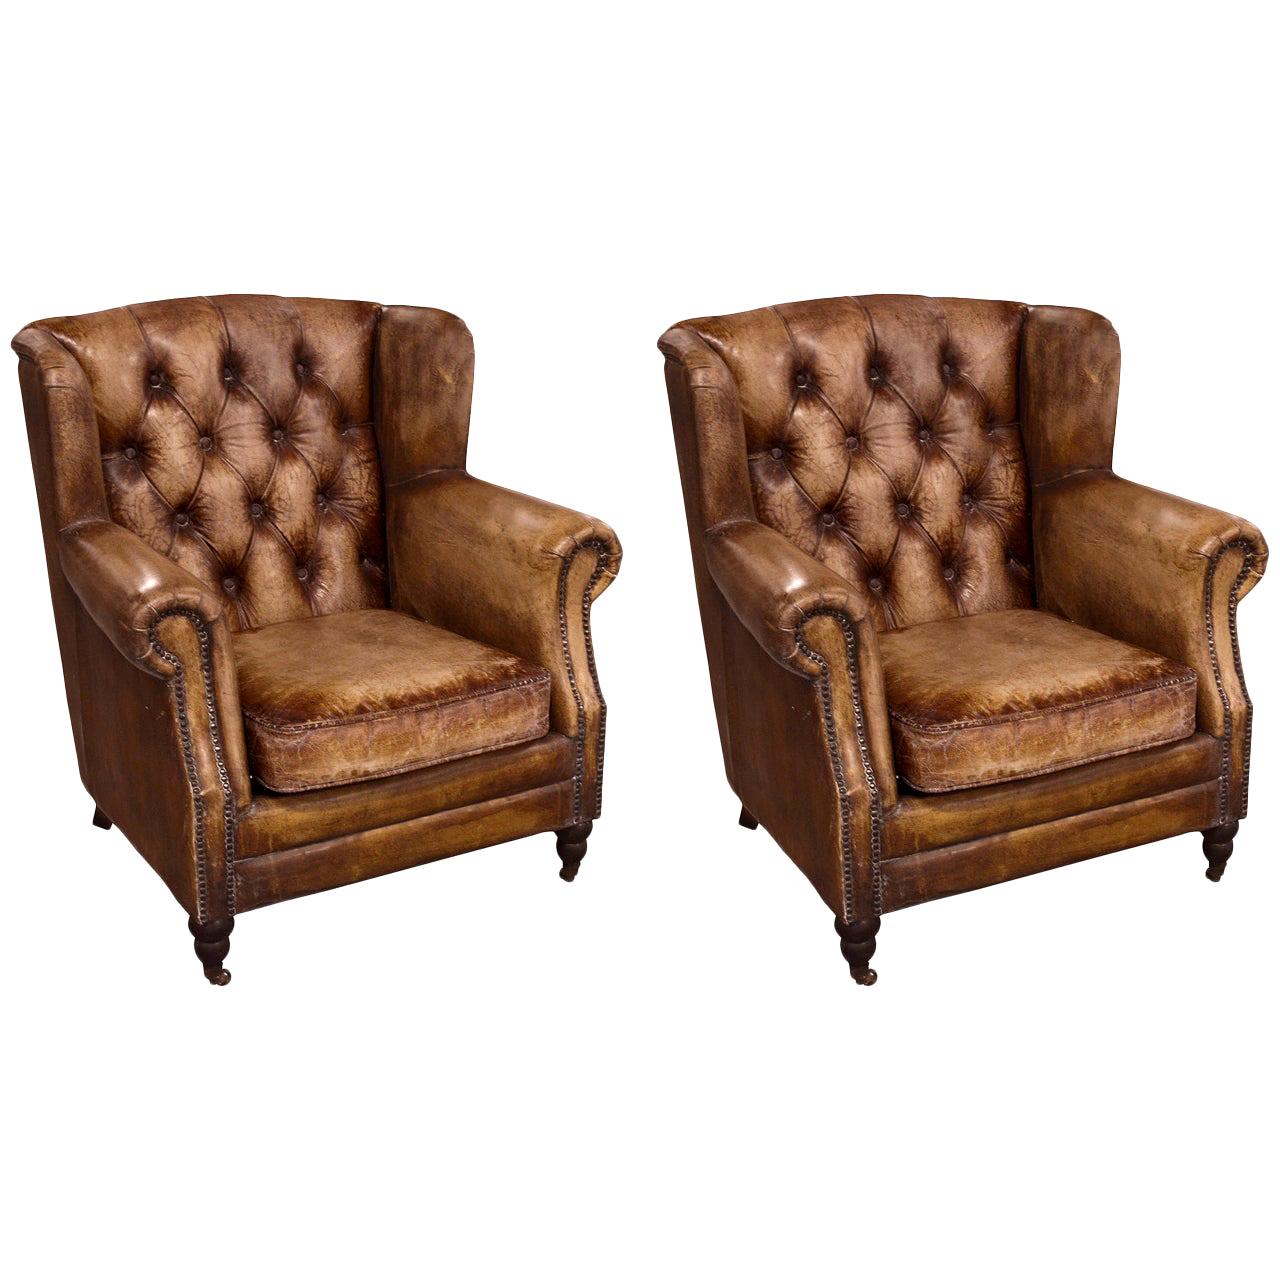 Pair of English Library Chairs with Distressed Leather, Priced Per Chair For Sale